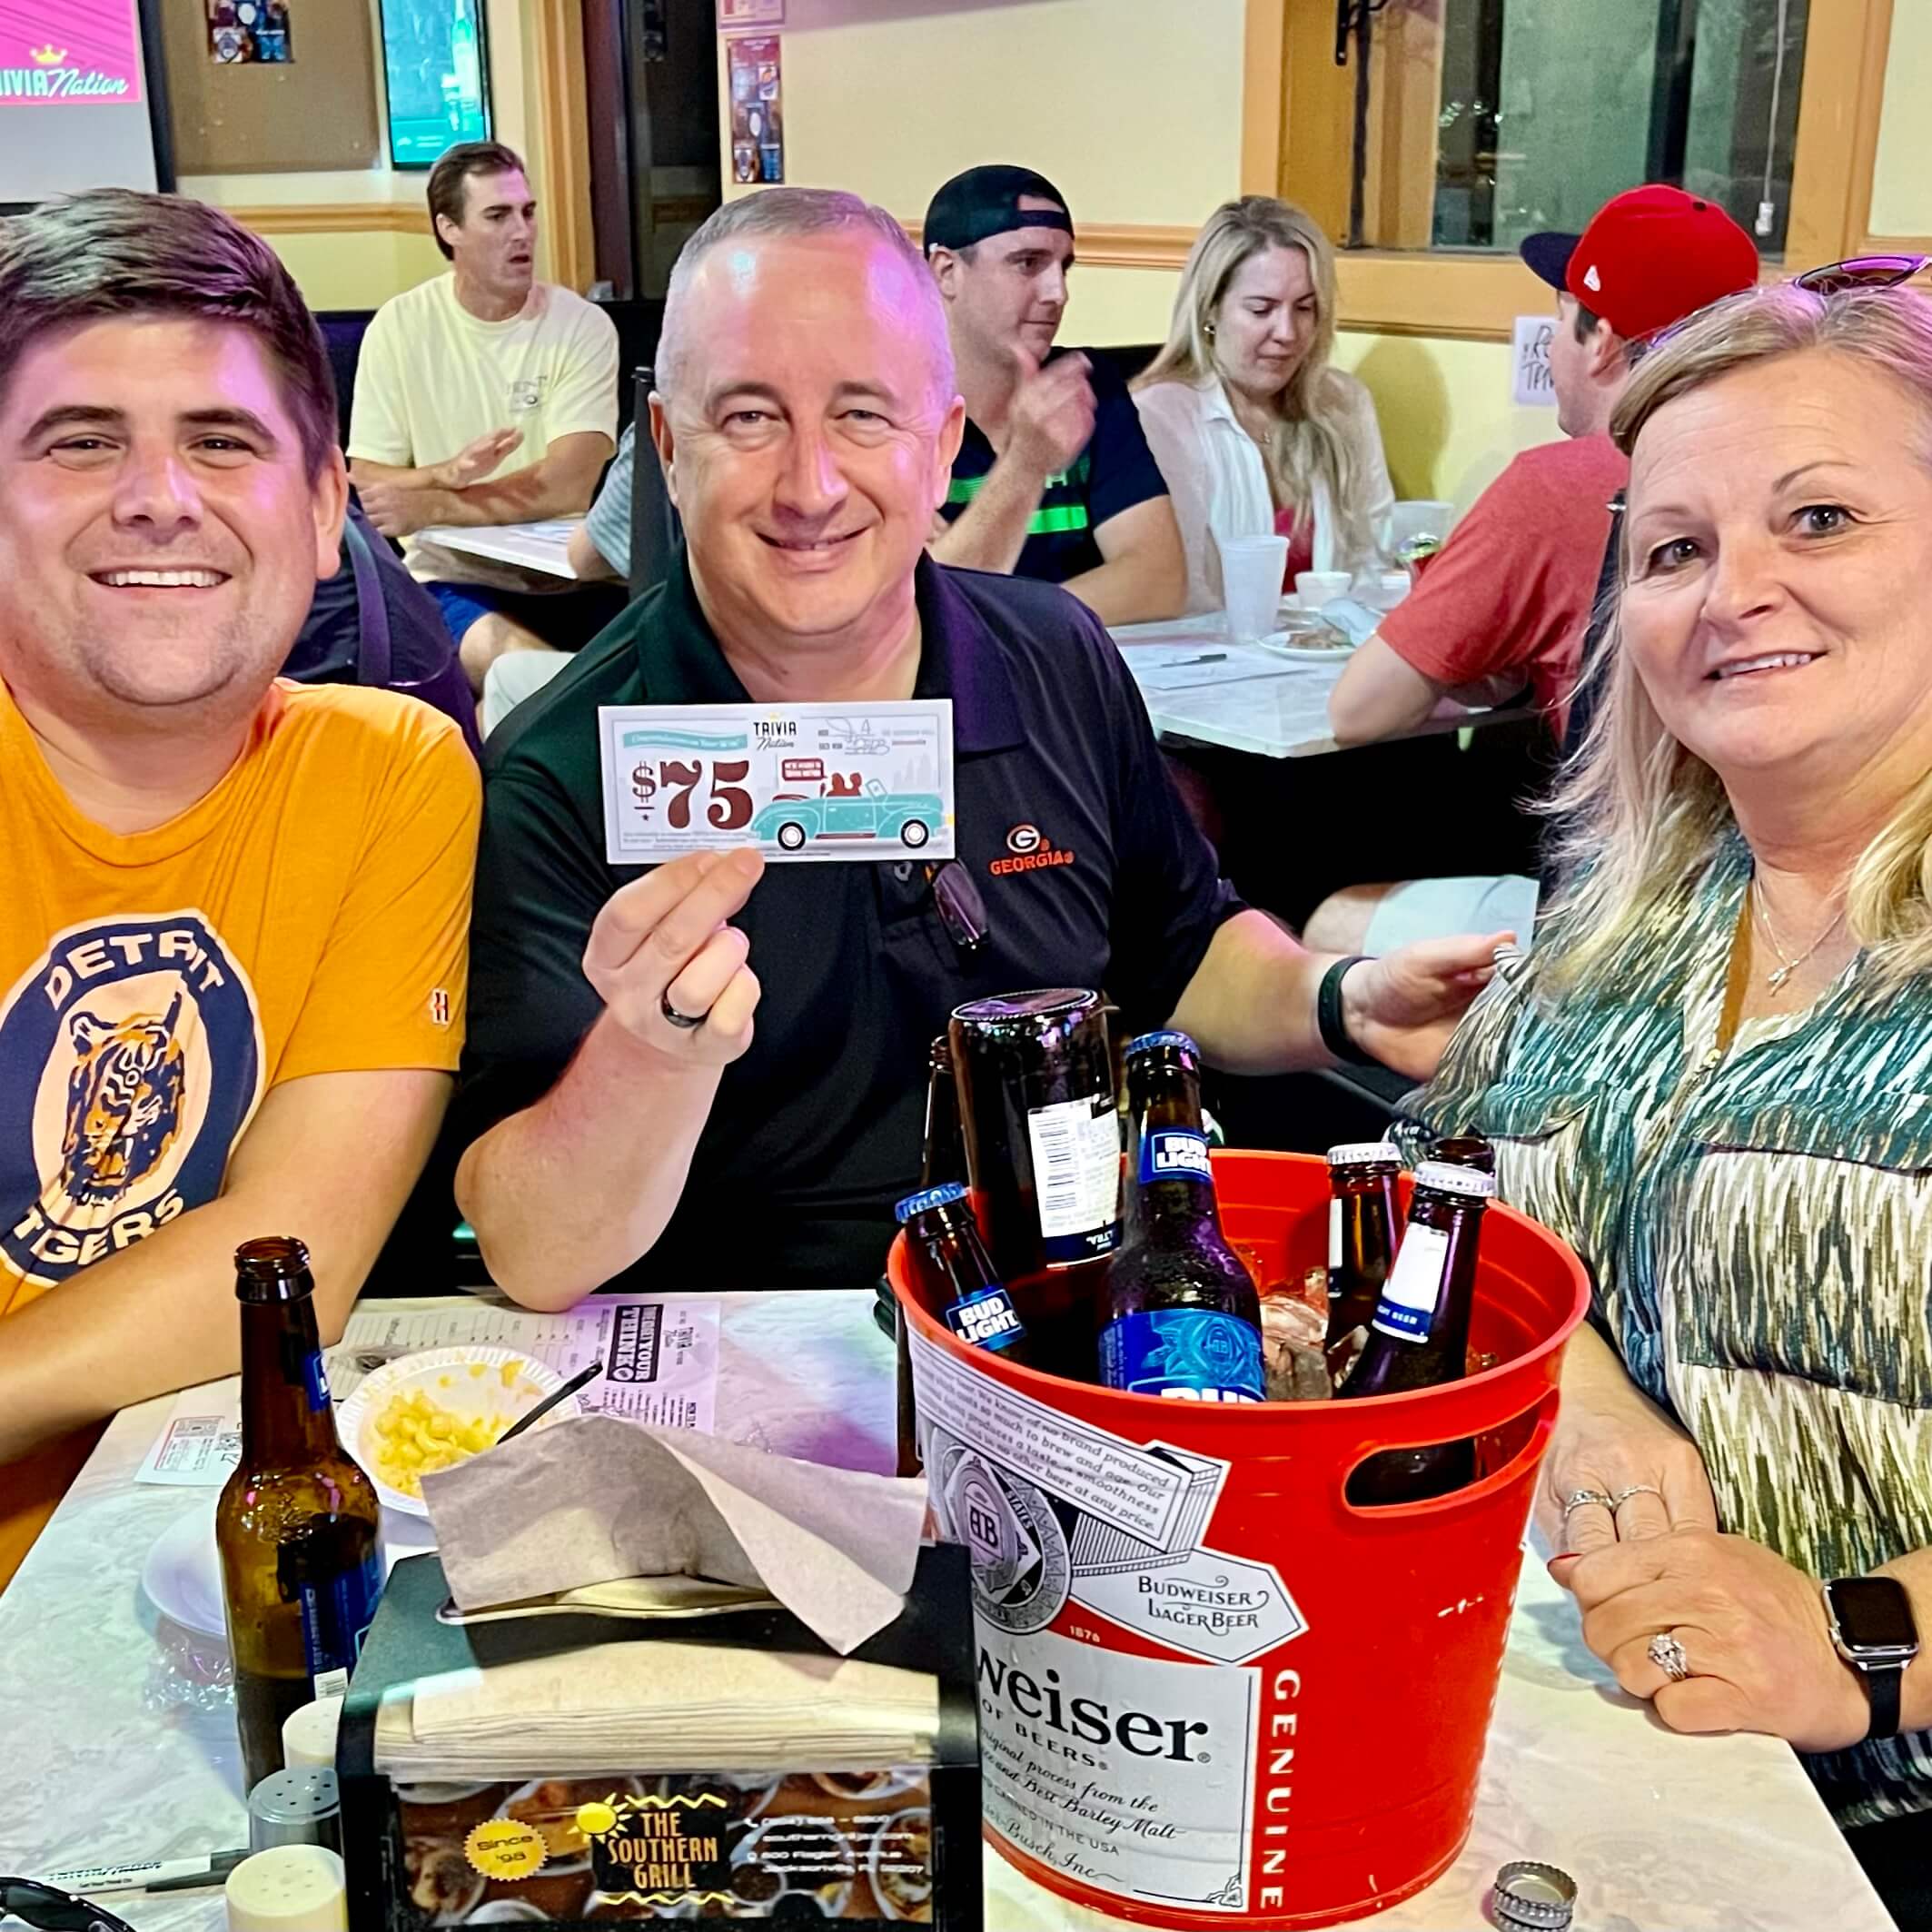 The Southern Grill Jacksonville FL 32207 trivia night 6